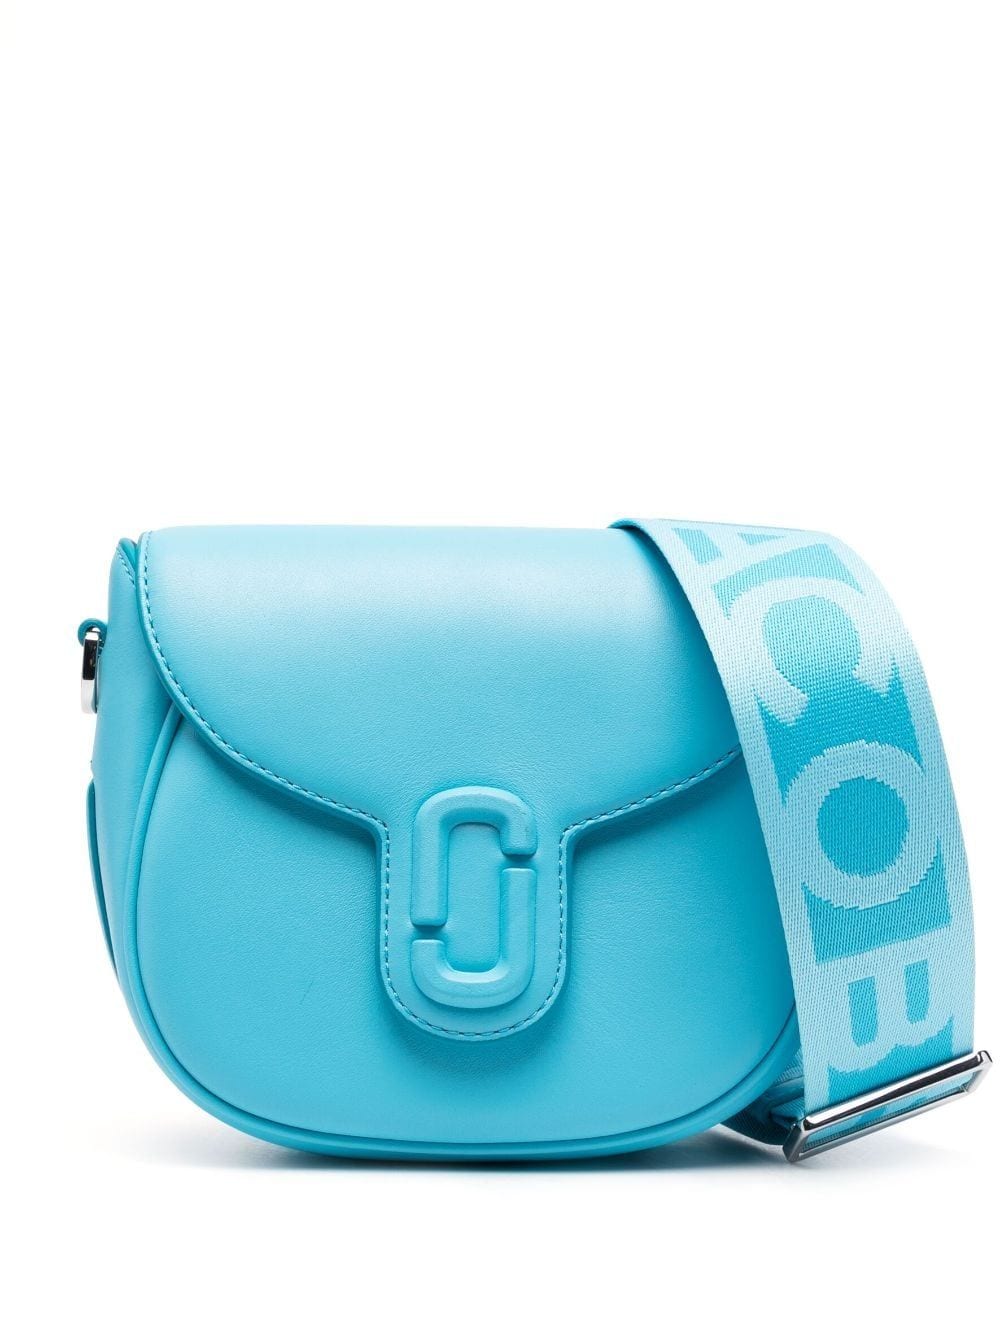 Sell Marc Jacobs Snapshot Bag - Blue